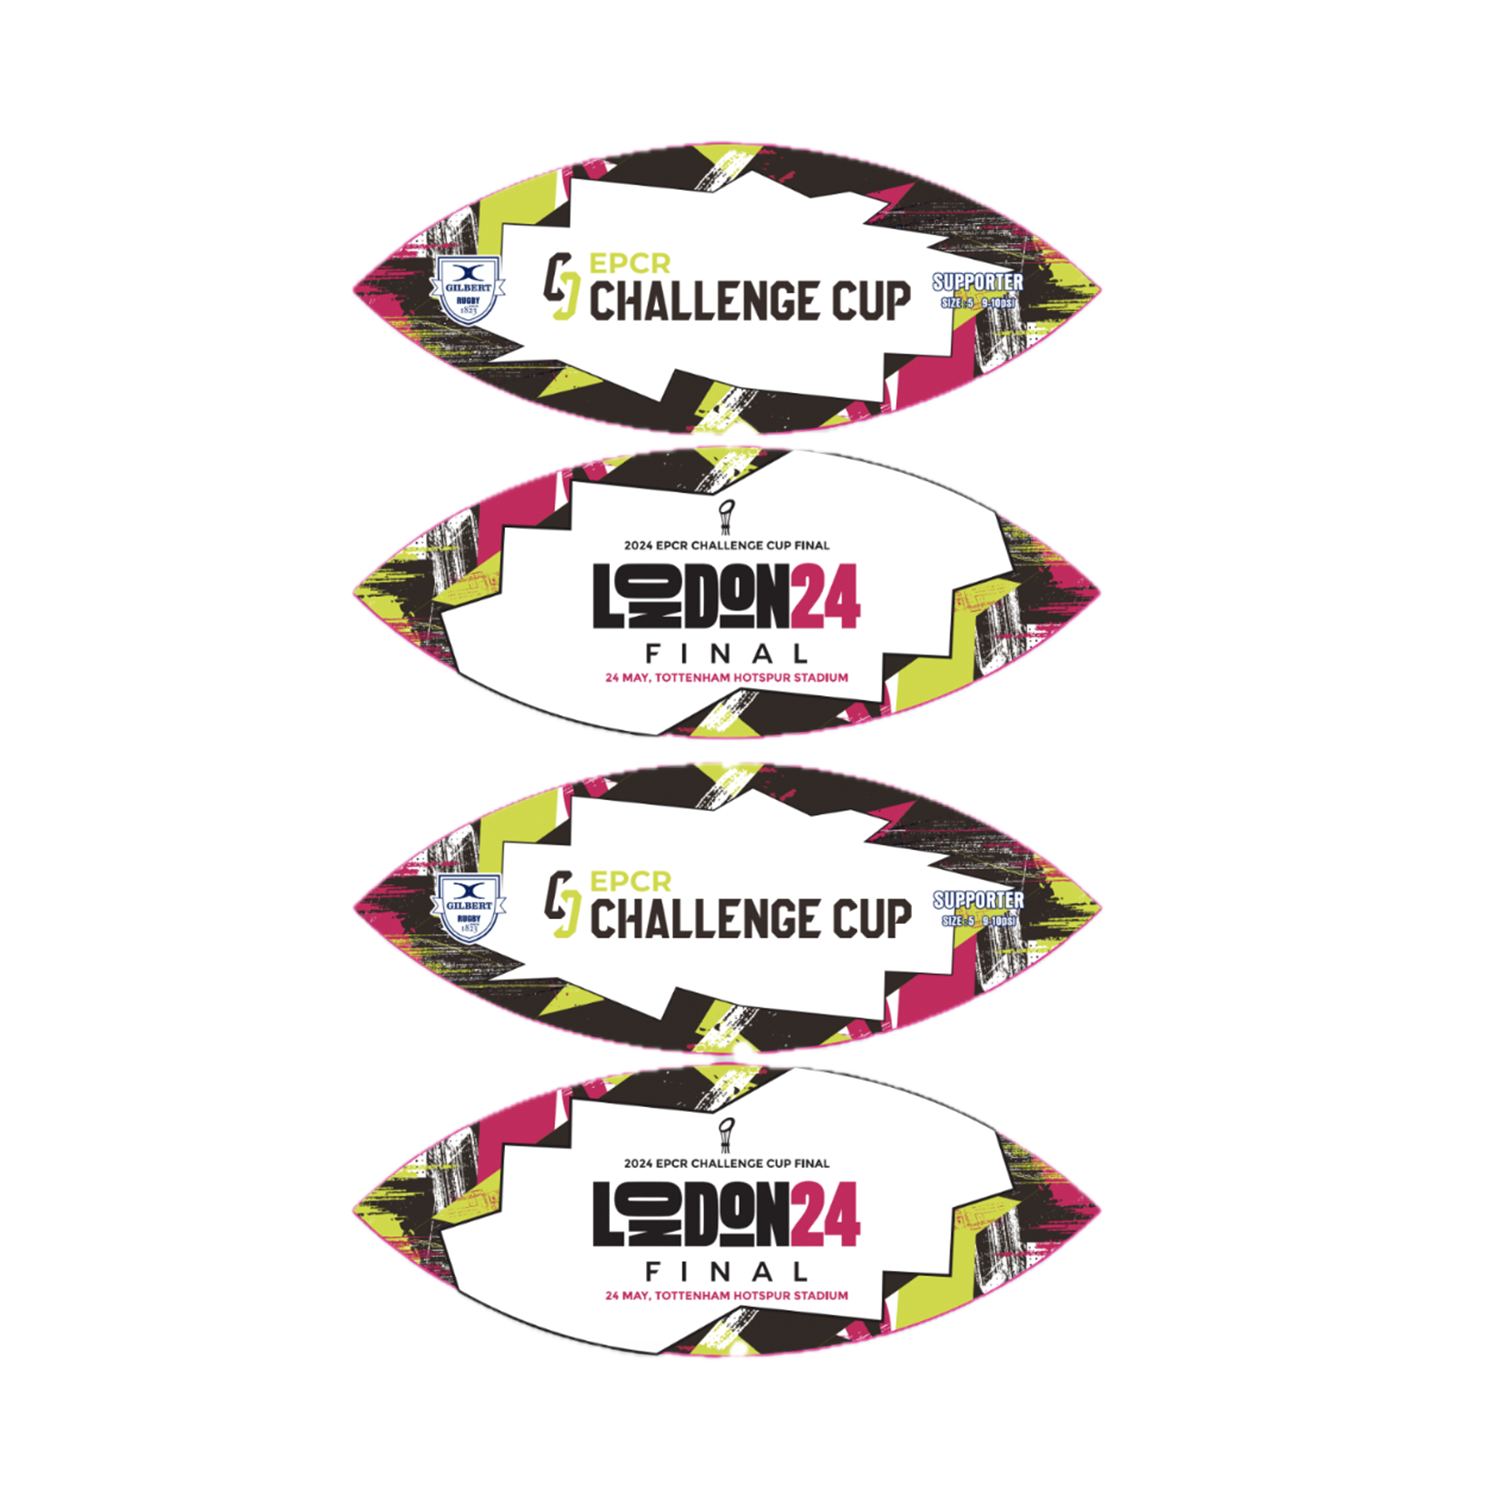 EPCR Challenge Cup Final Supporter Ball Size 5